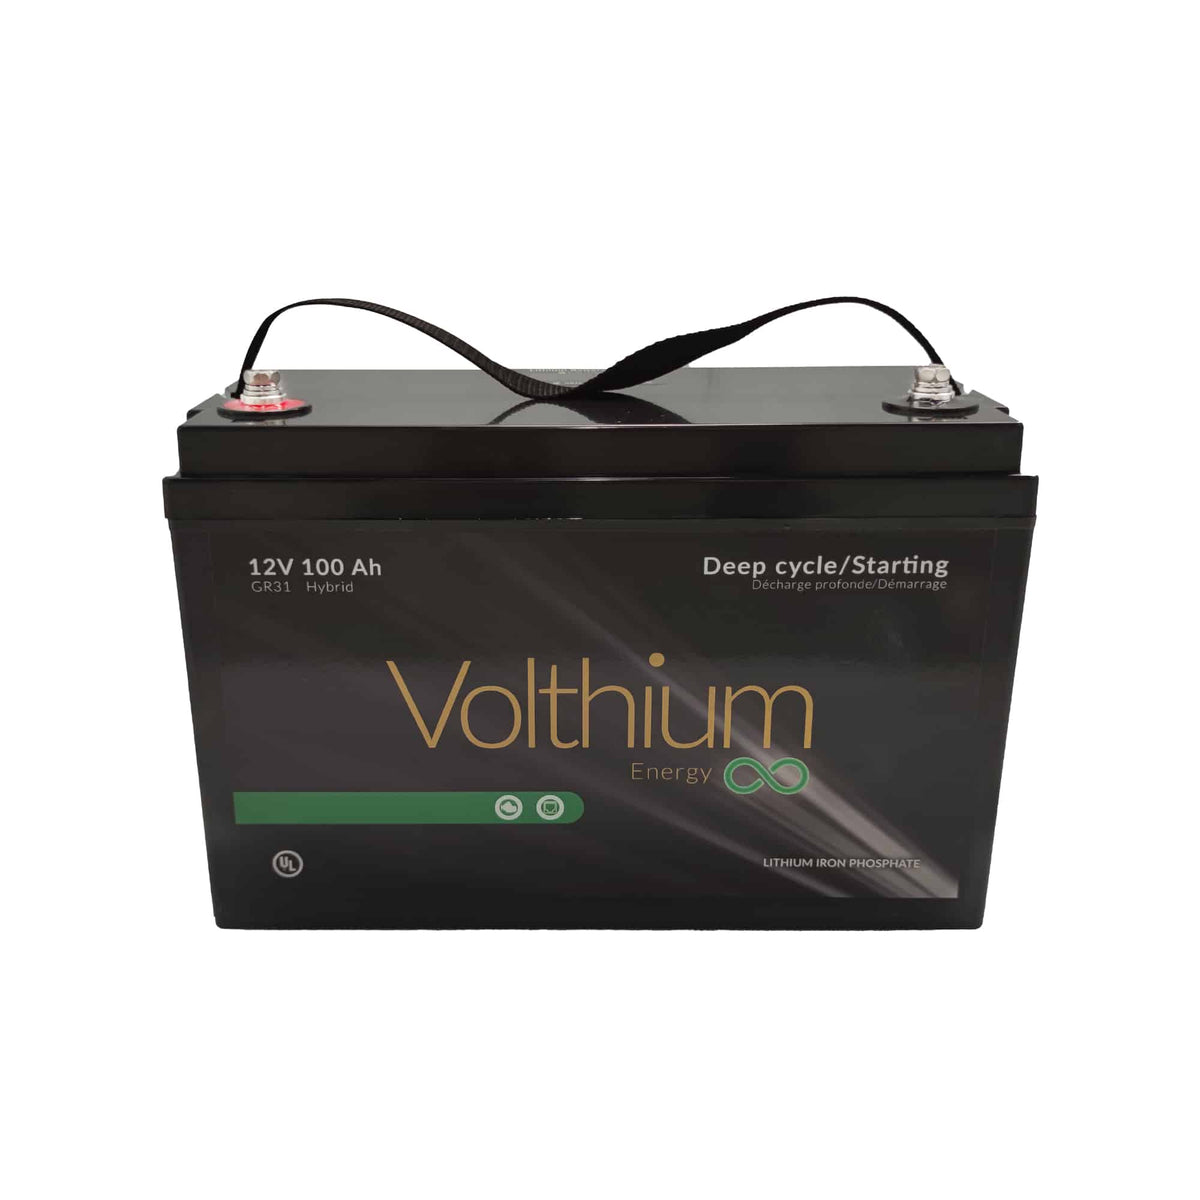 View of batteries_chargers Volthium Lithium Marine Battery 12V 150Ah - Hybrid (Engine Cranking / Deep Cycle) available at EZOKO Pike and Musky Shop